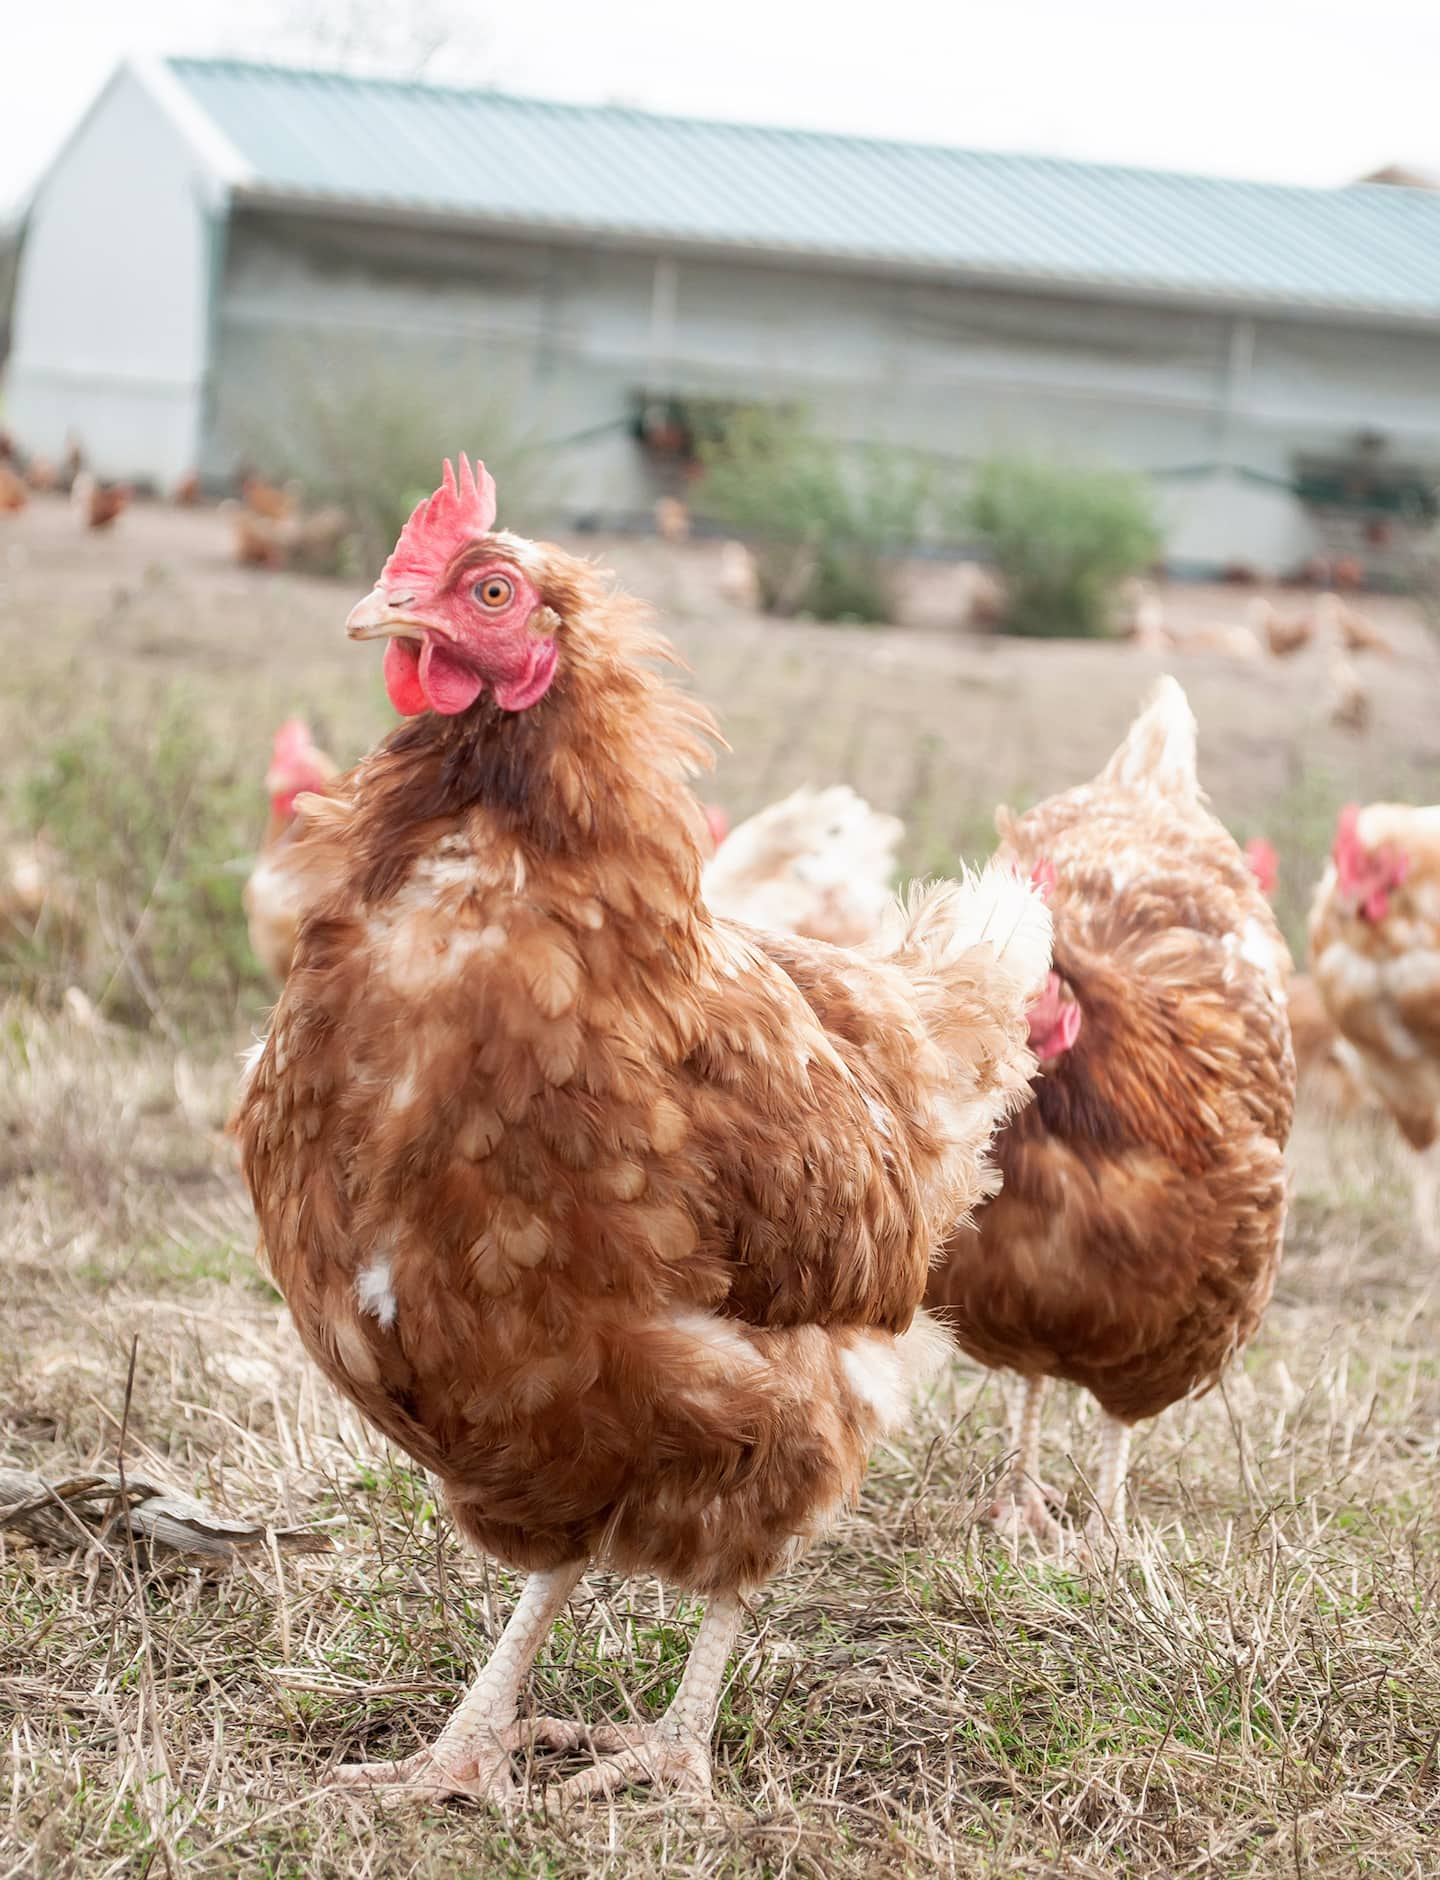 Avian flu: England imposes confinement of poultry